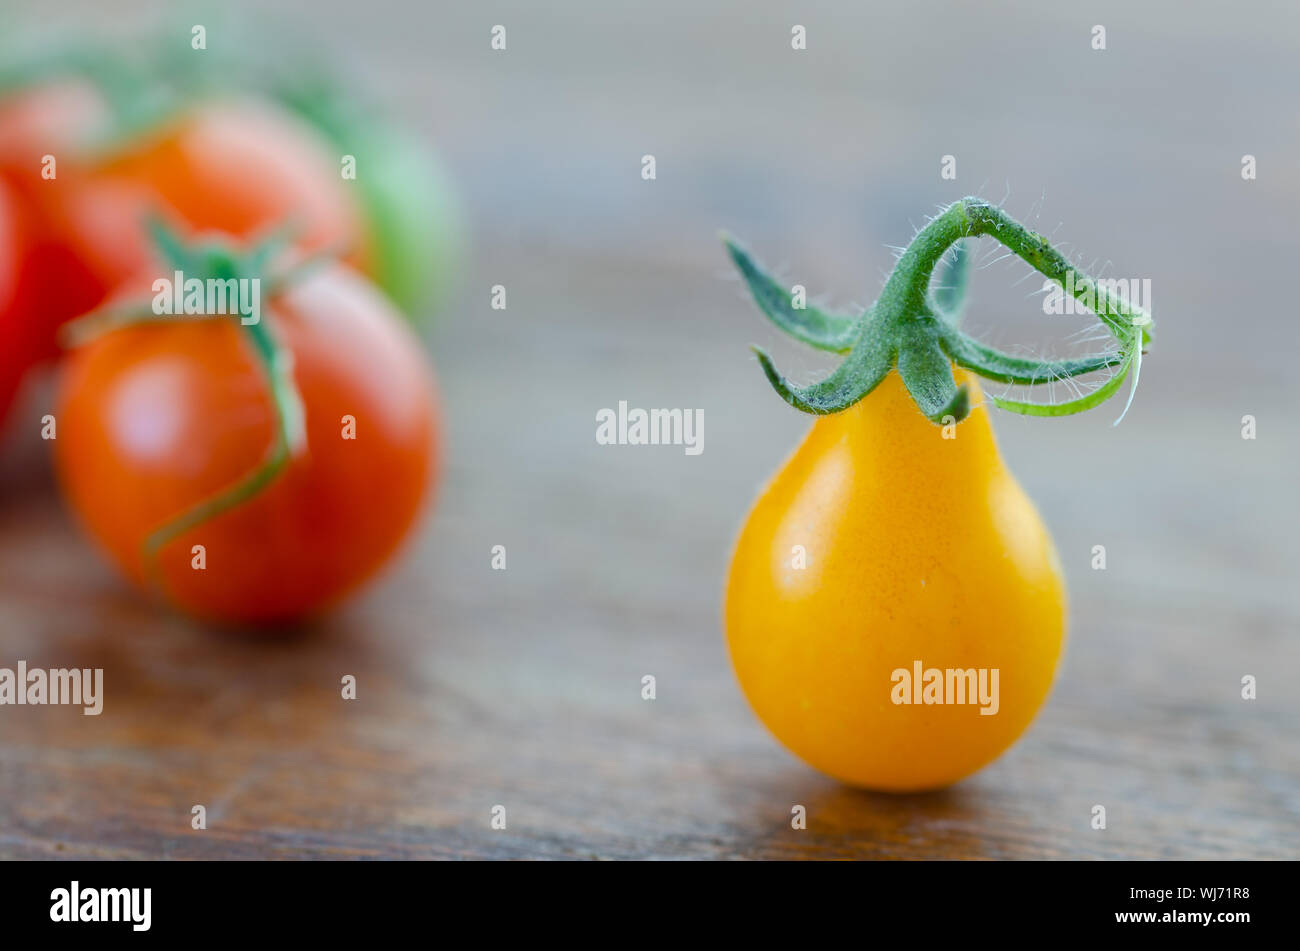 Yellow pear tomato  and red cherry tomatoes on wooden table,close up, Stock Photo